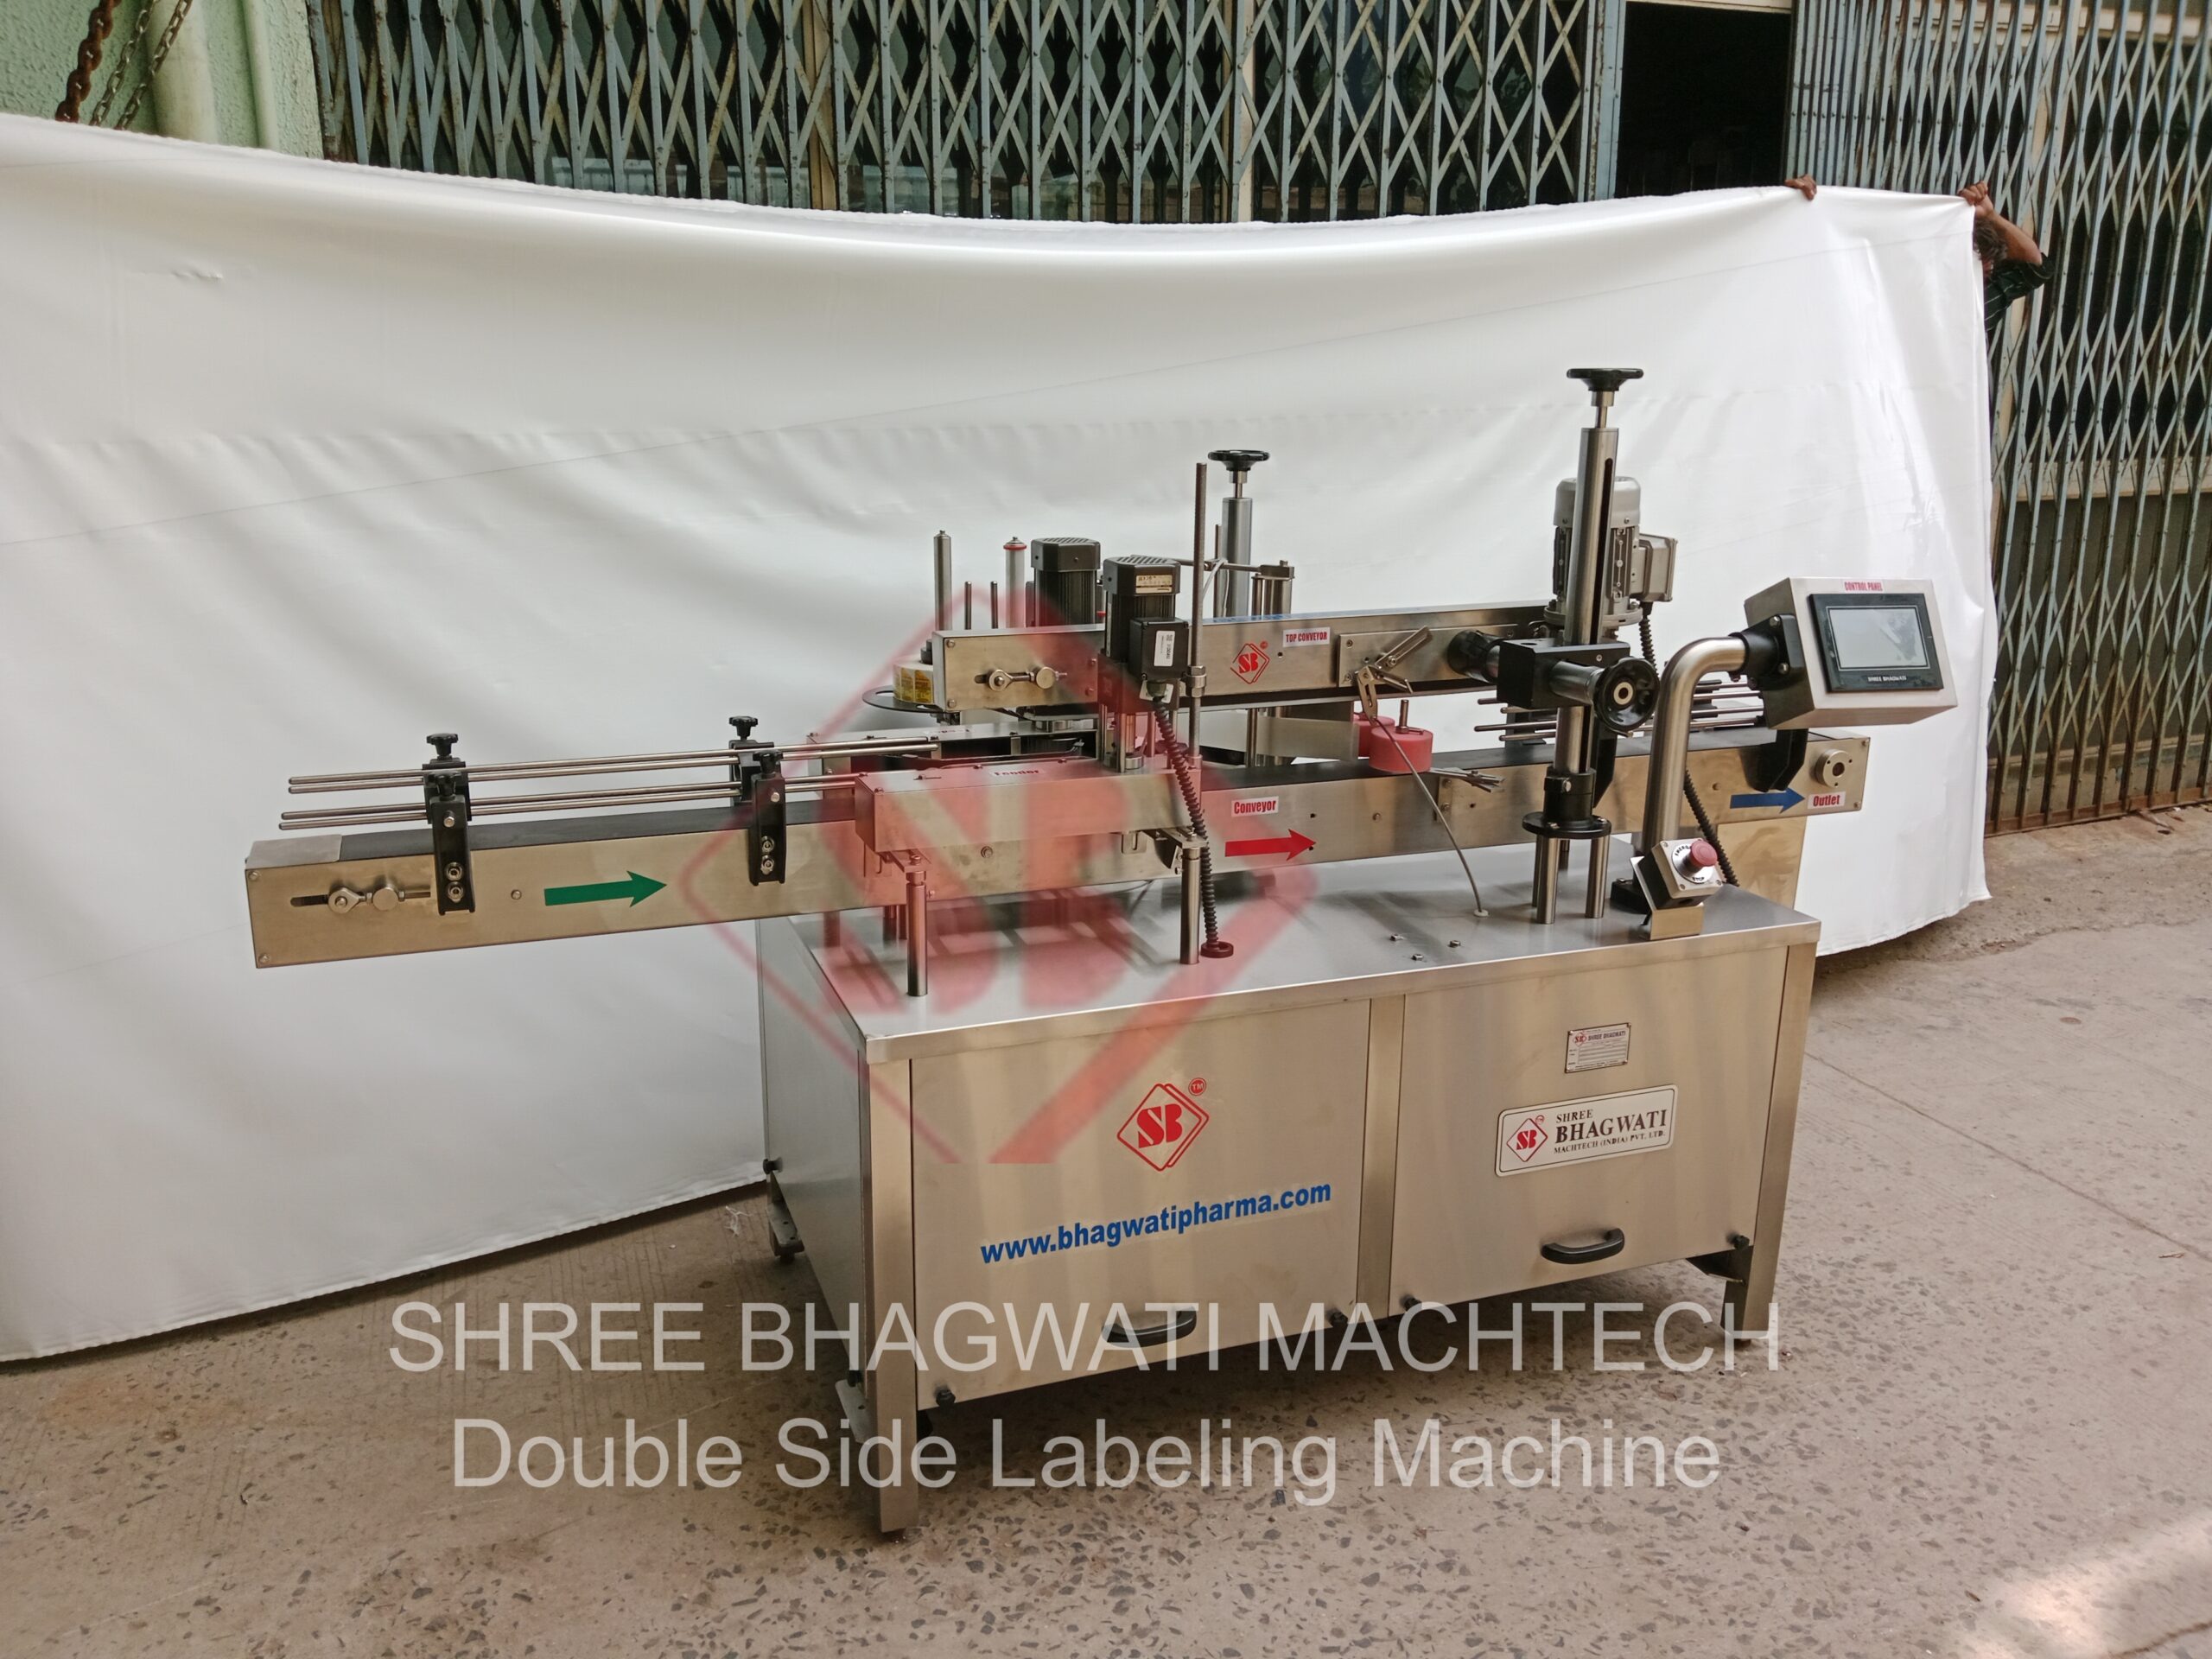 Double Side Labeling Machine Supplier